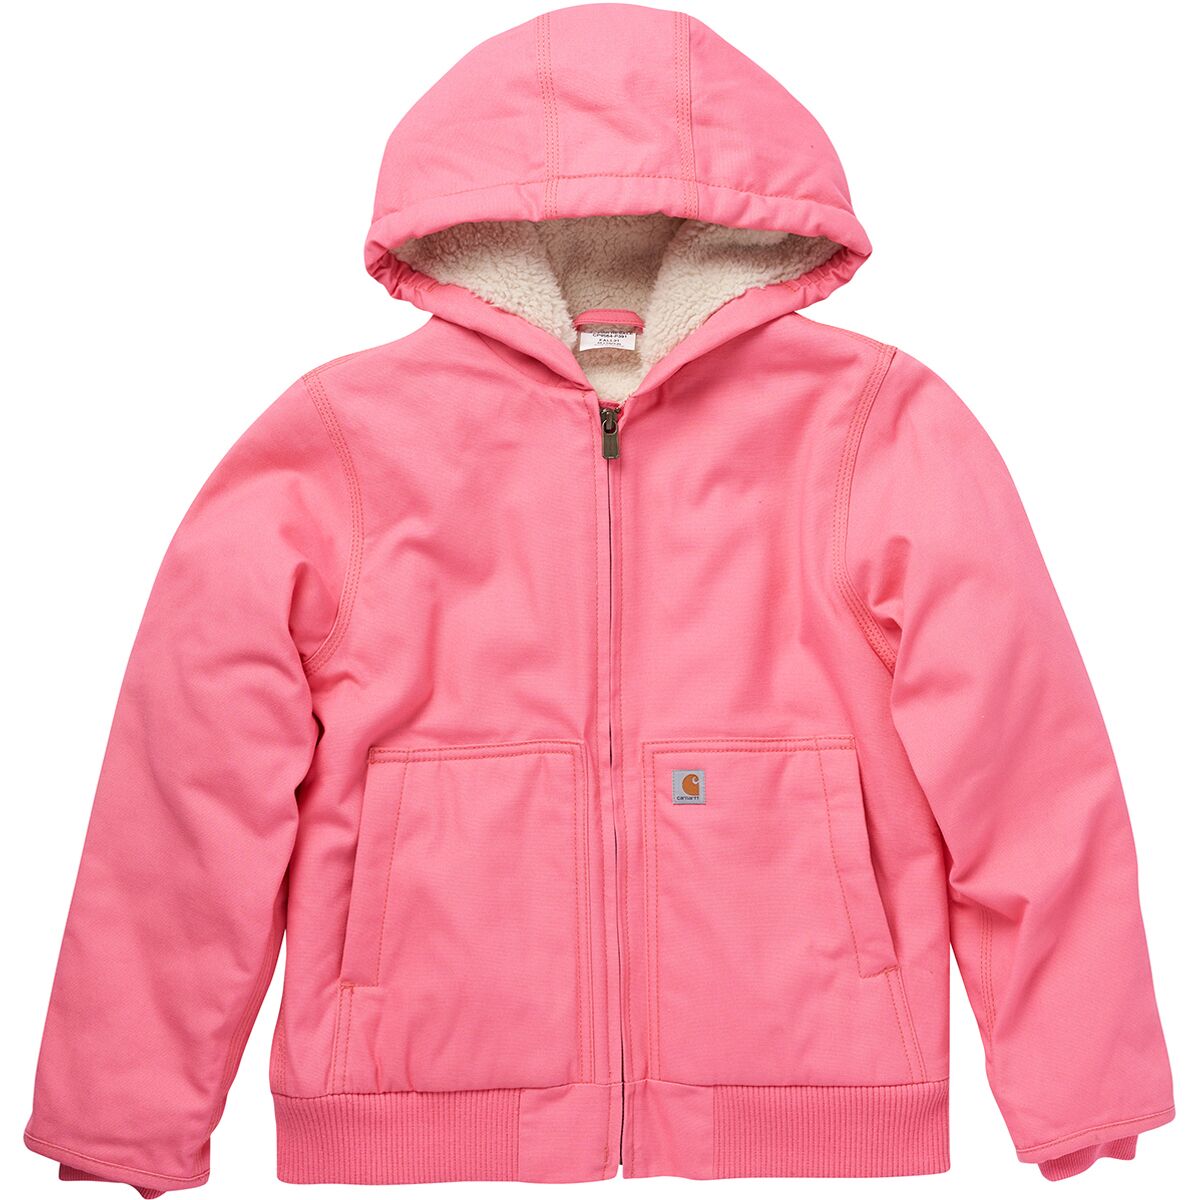 Carhartt Canvas Insulated Active Jacket - Toddler Girls'